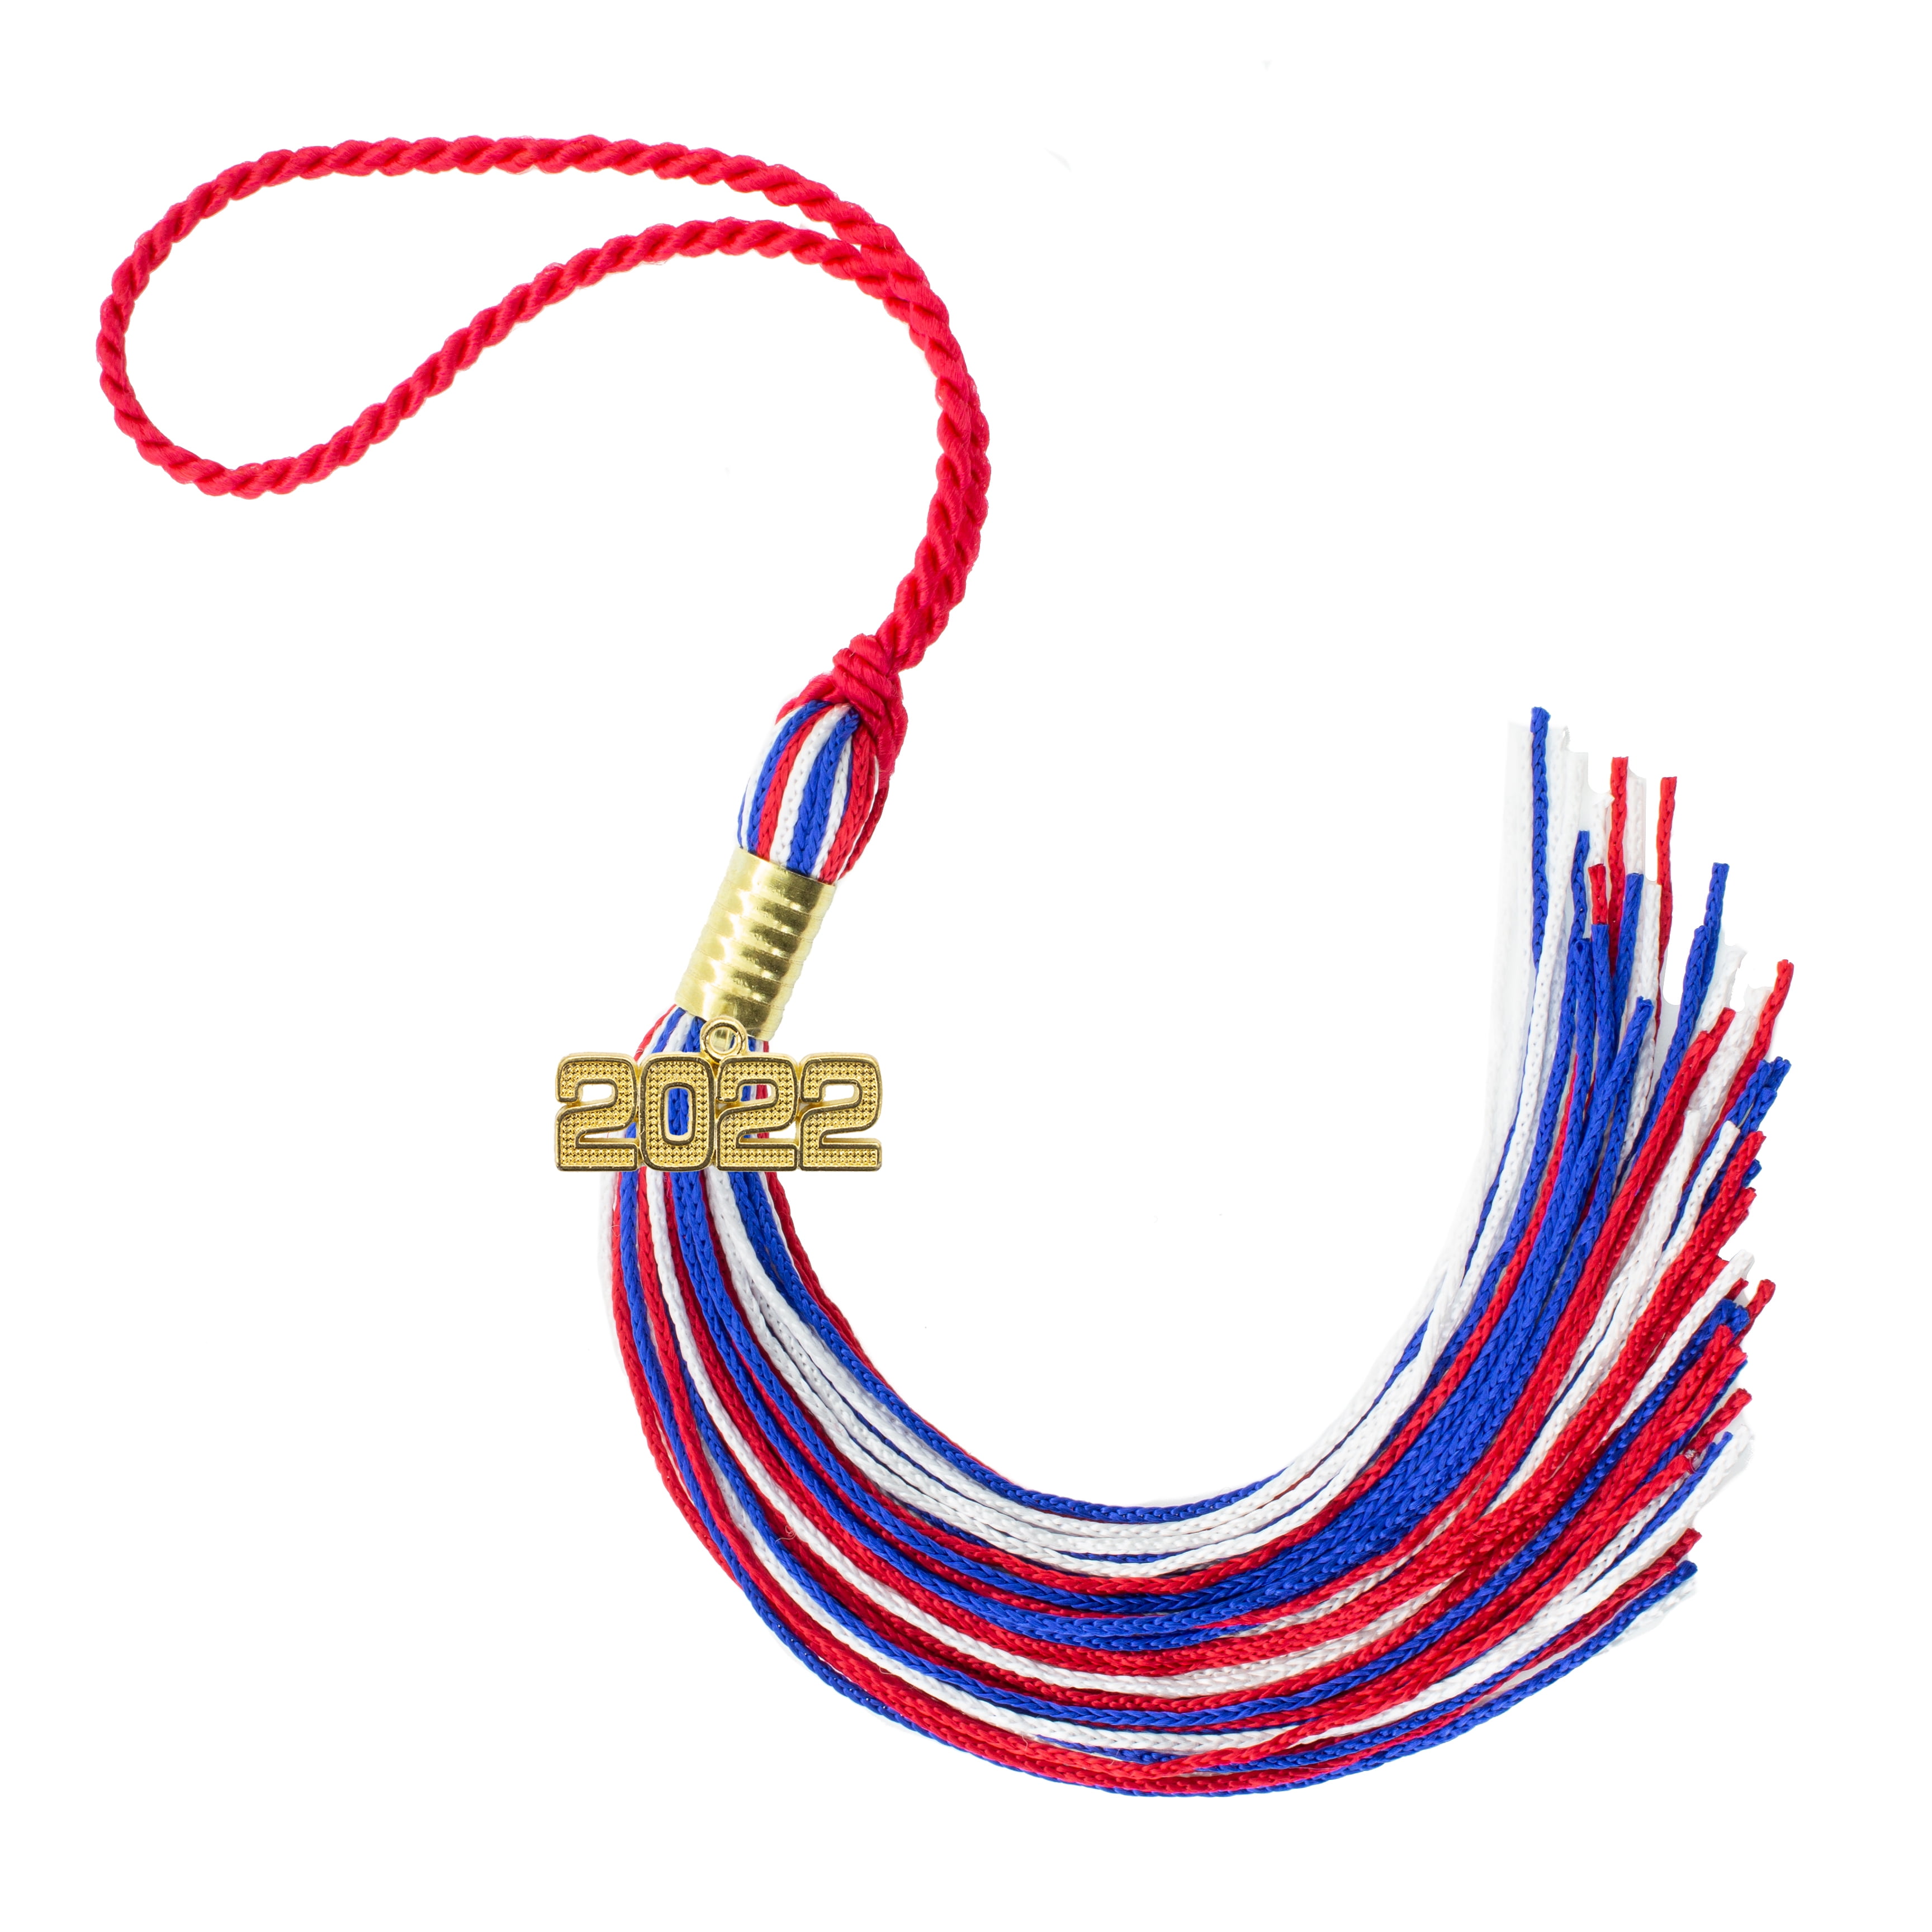 Graduation Tassel with Year Date Charm Red/White/Royal Blue Solid and Multi Color